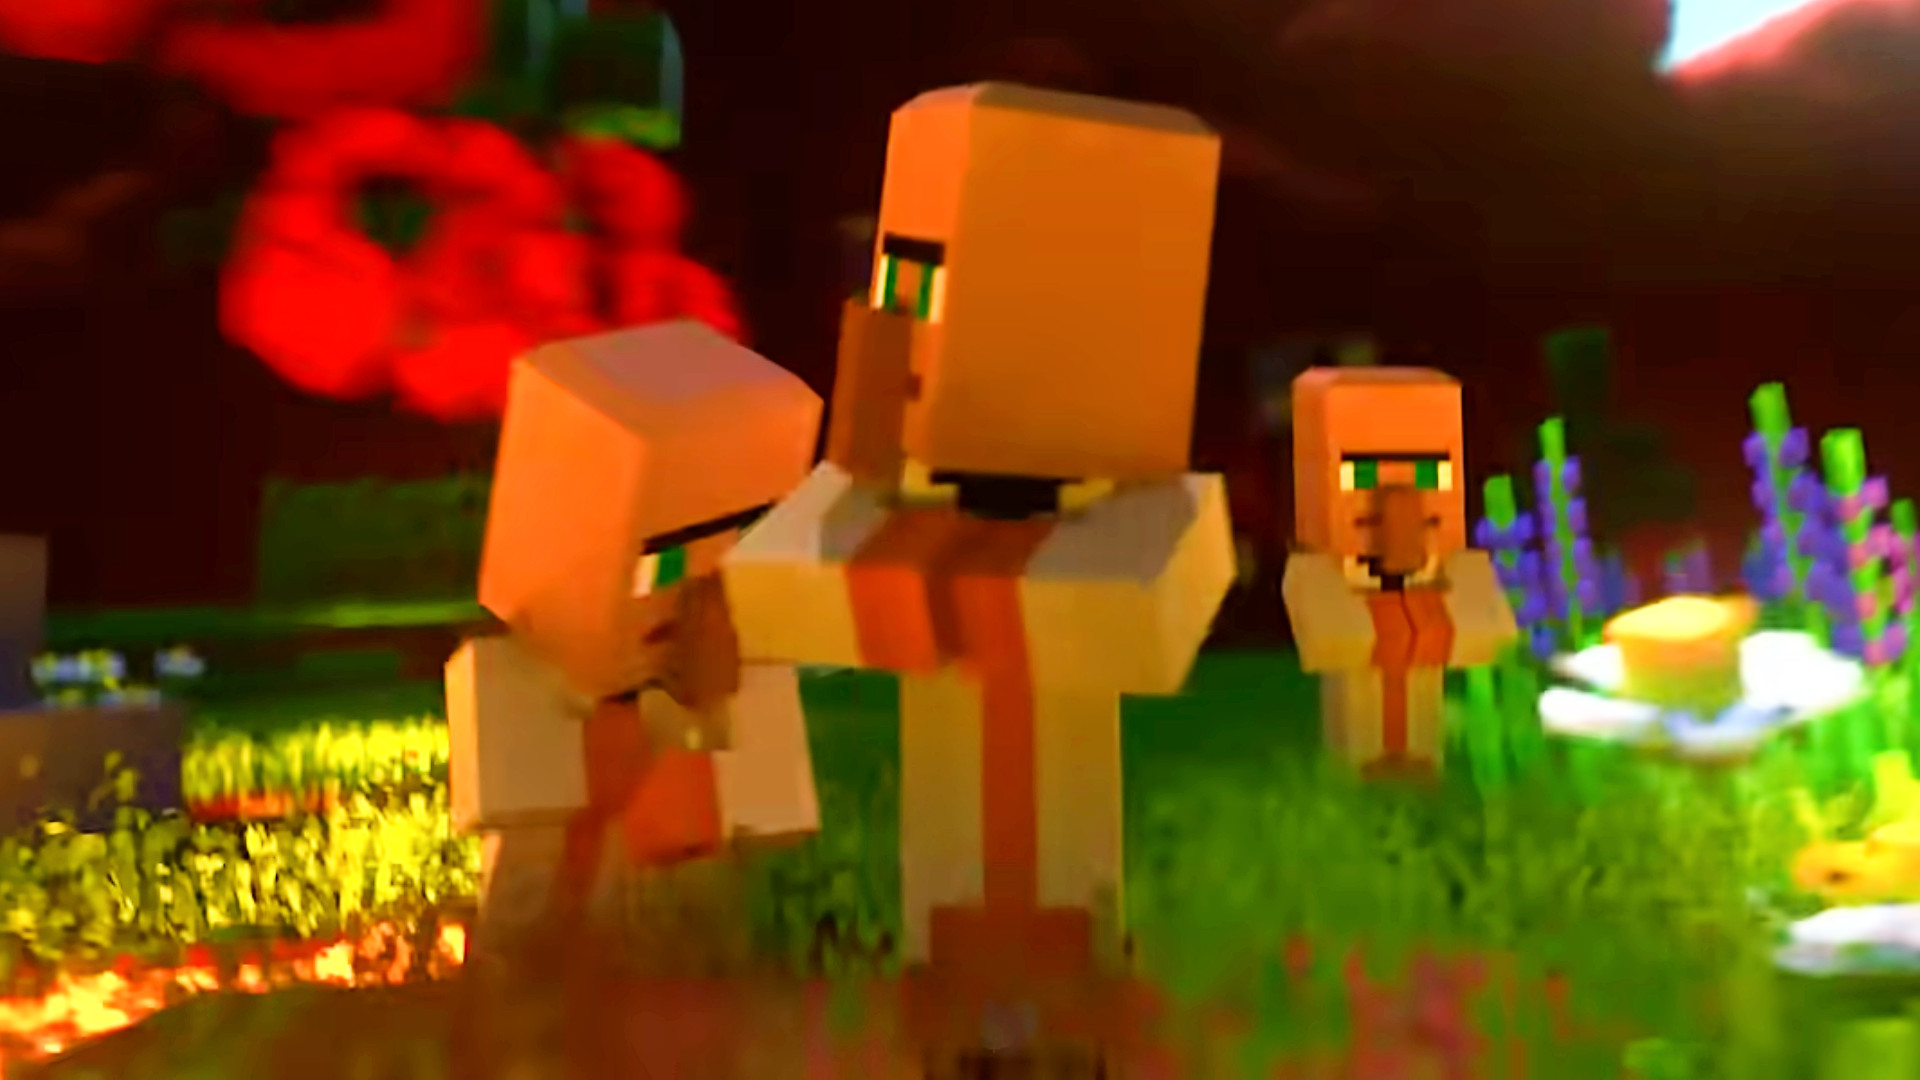 Minecraft Legends rewrites the rules of the sandbox game